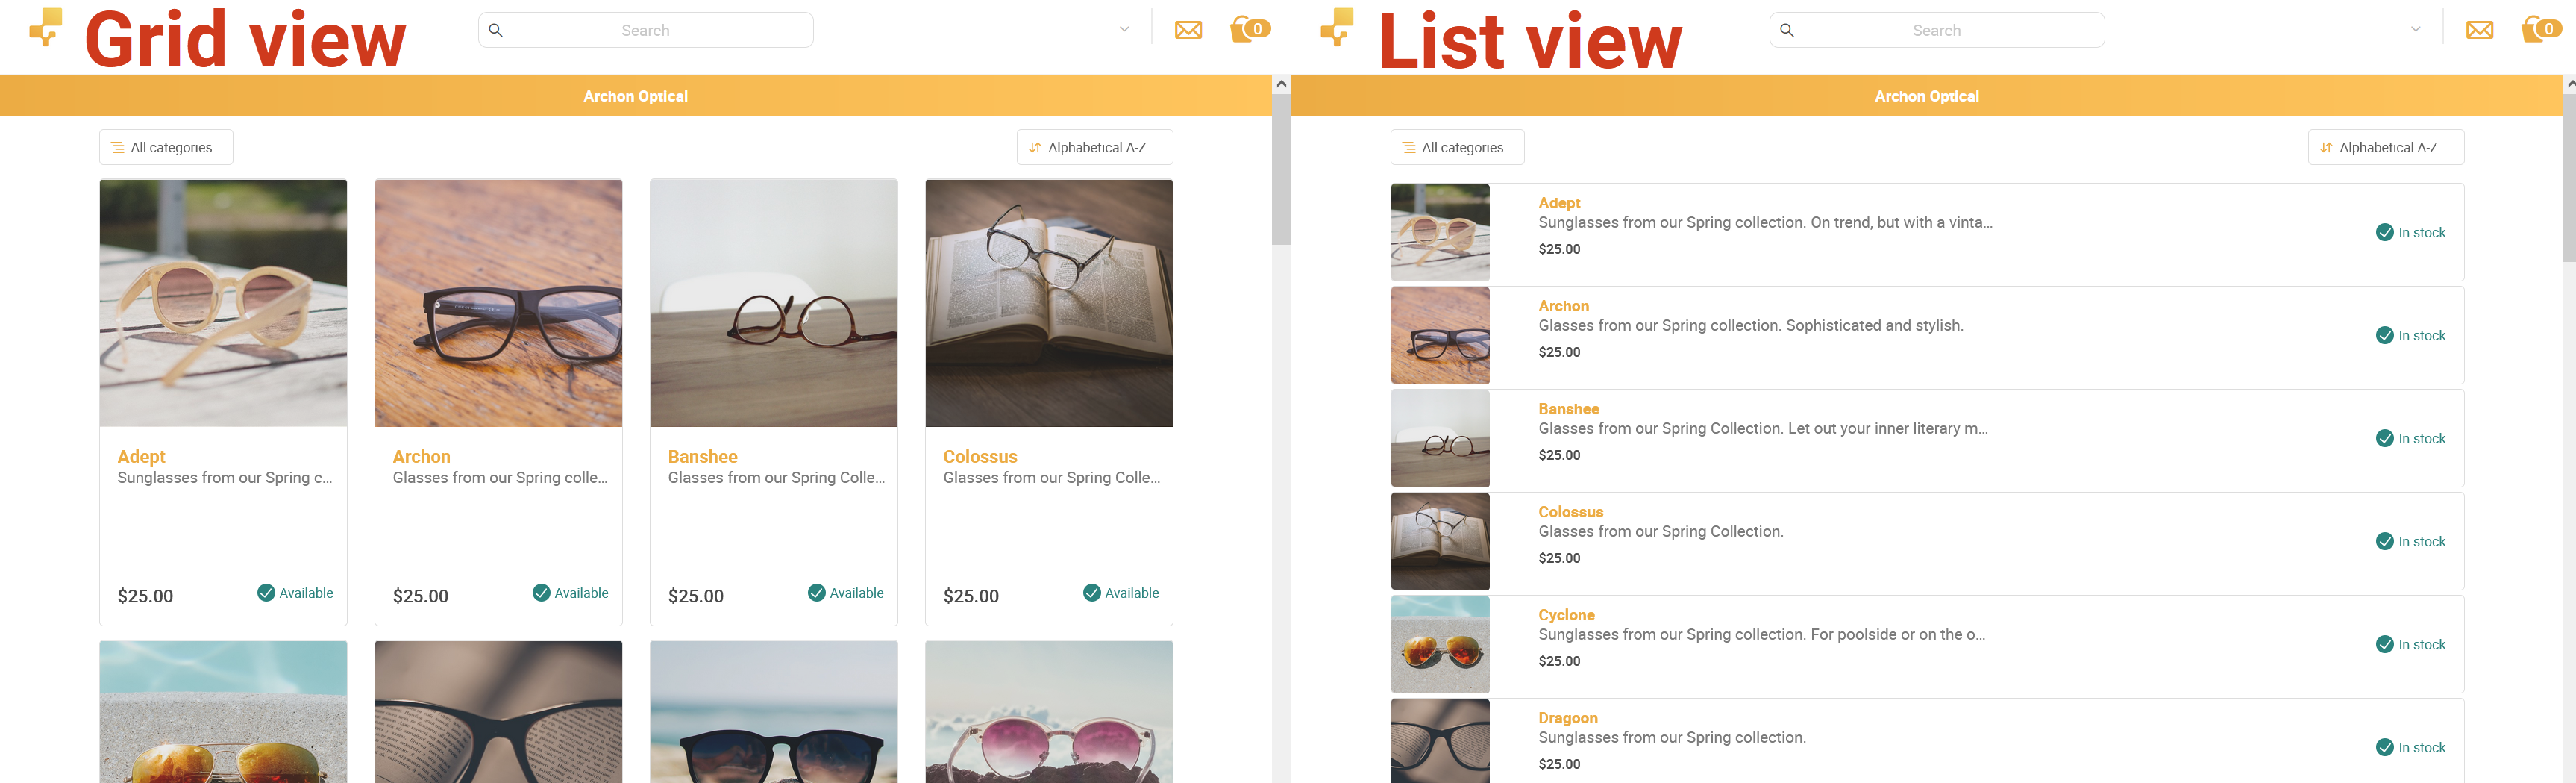 The Online Showroom with products listed in a grid view or list view.